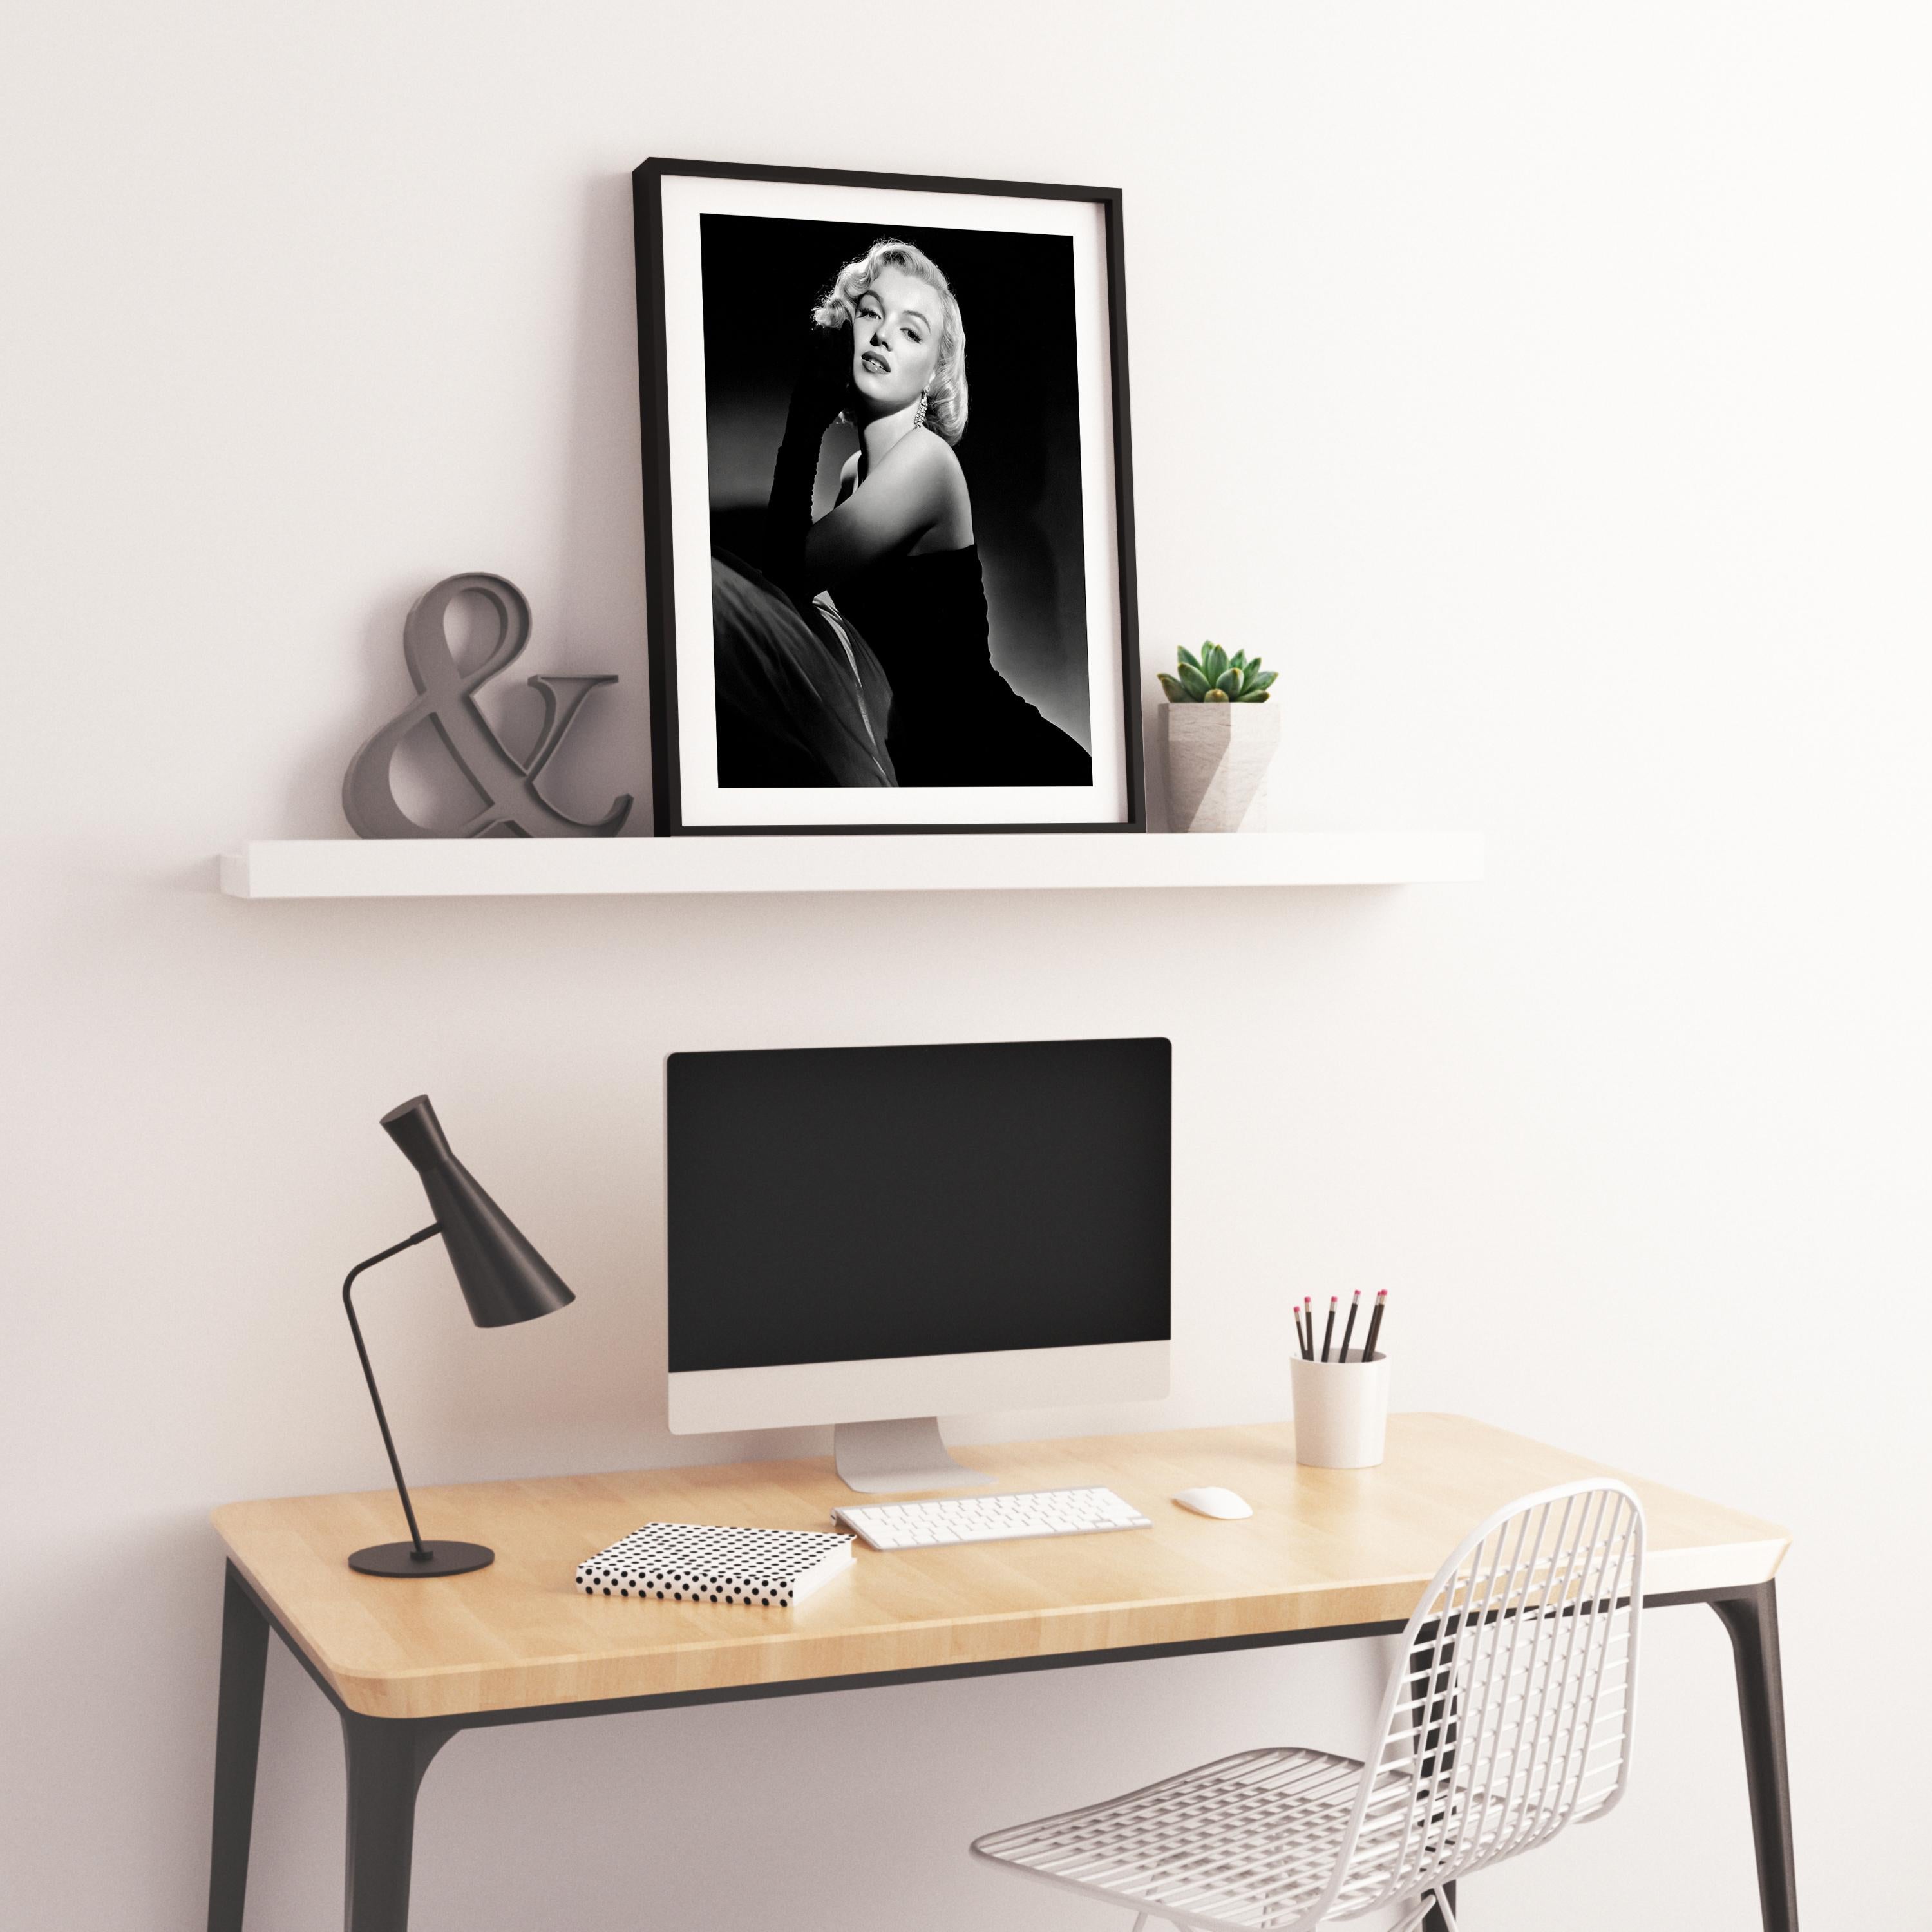 This black and white pinup portrait features Marilyn Monroe in the studio, posed in long black gloves.

Marilyn Monroe was an American actress, model, and singer. Famous for playing comic 